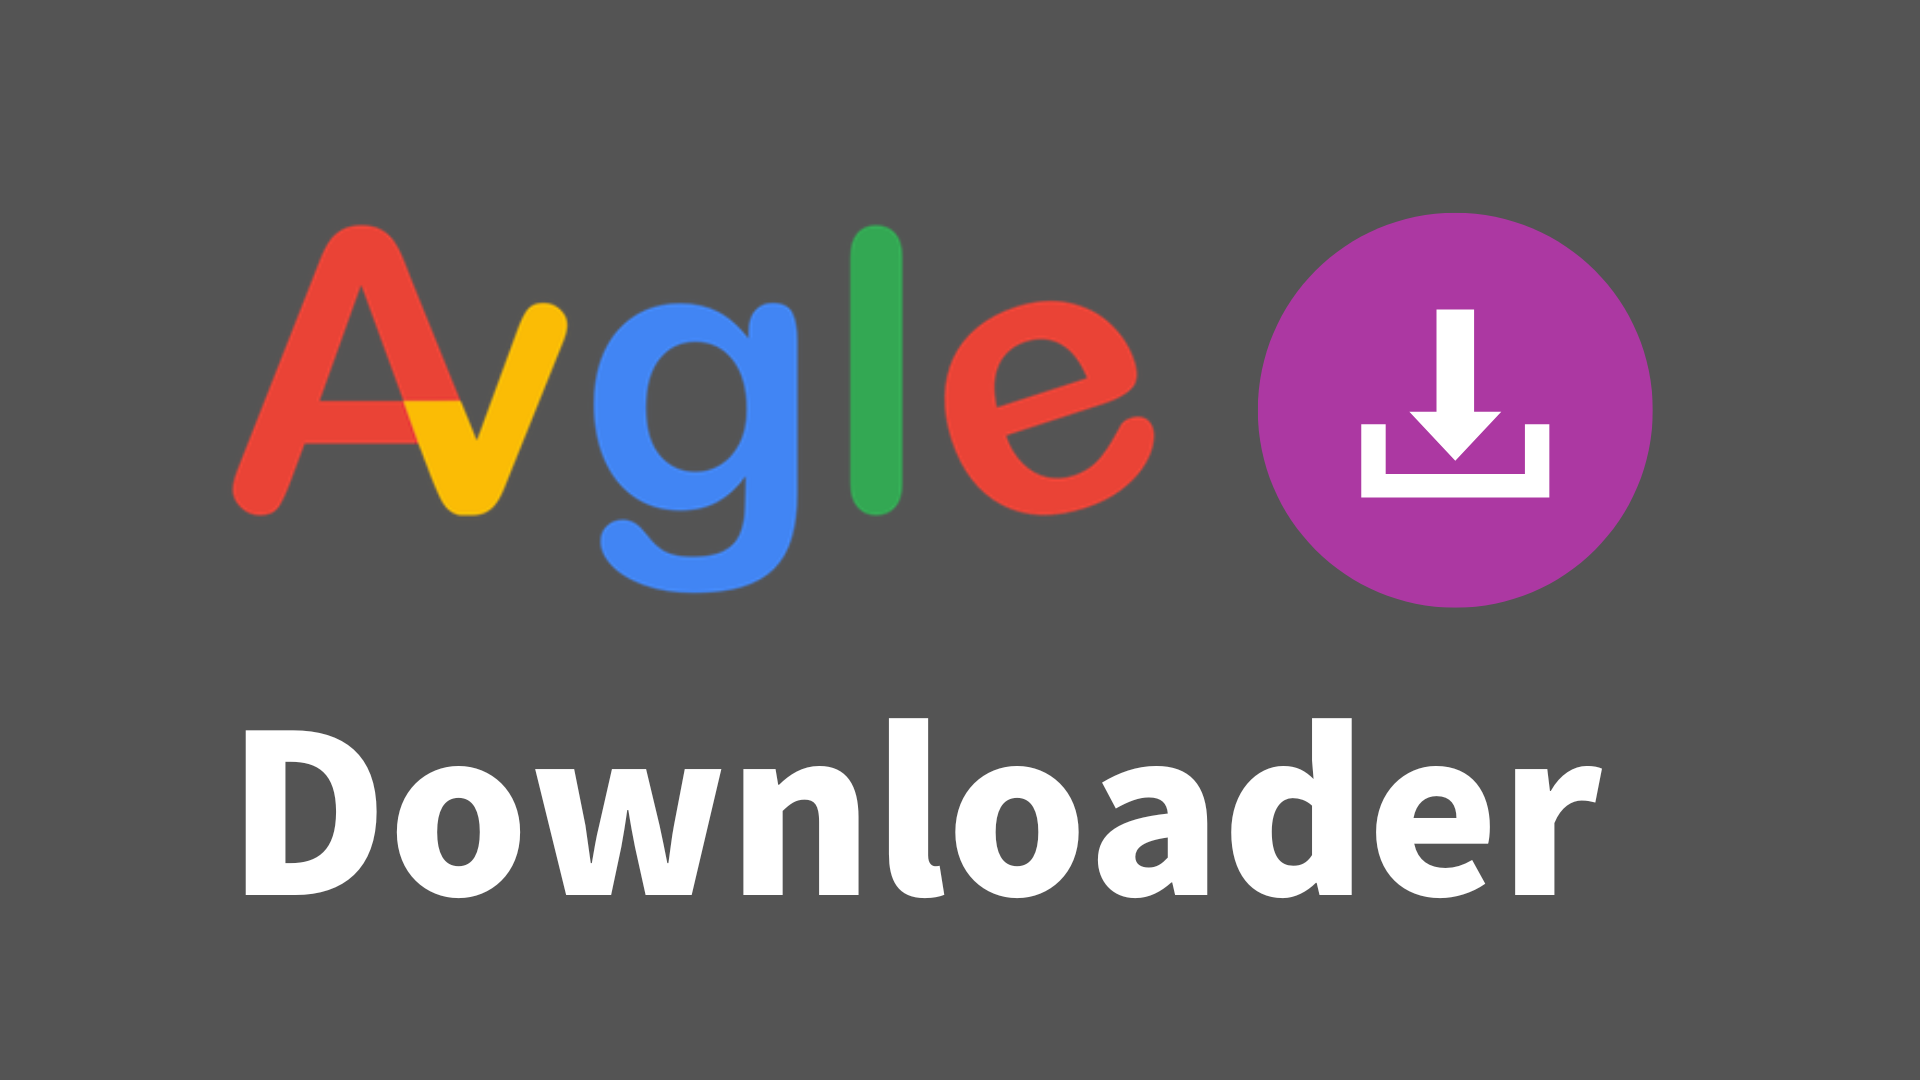 Download from avgle